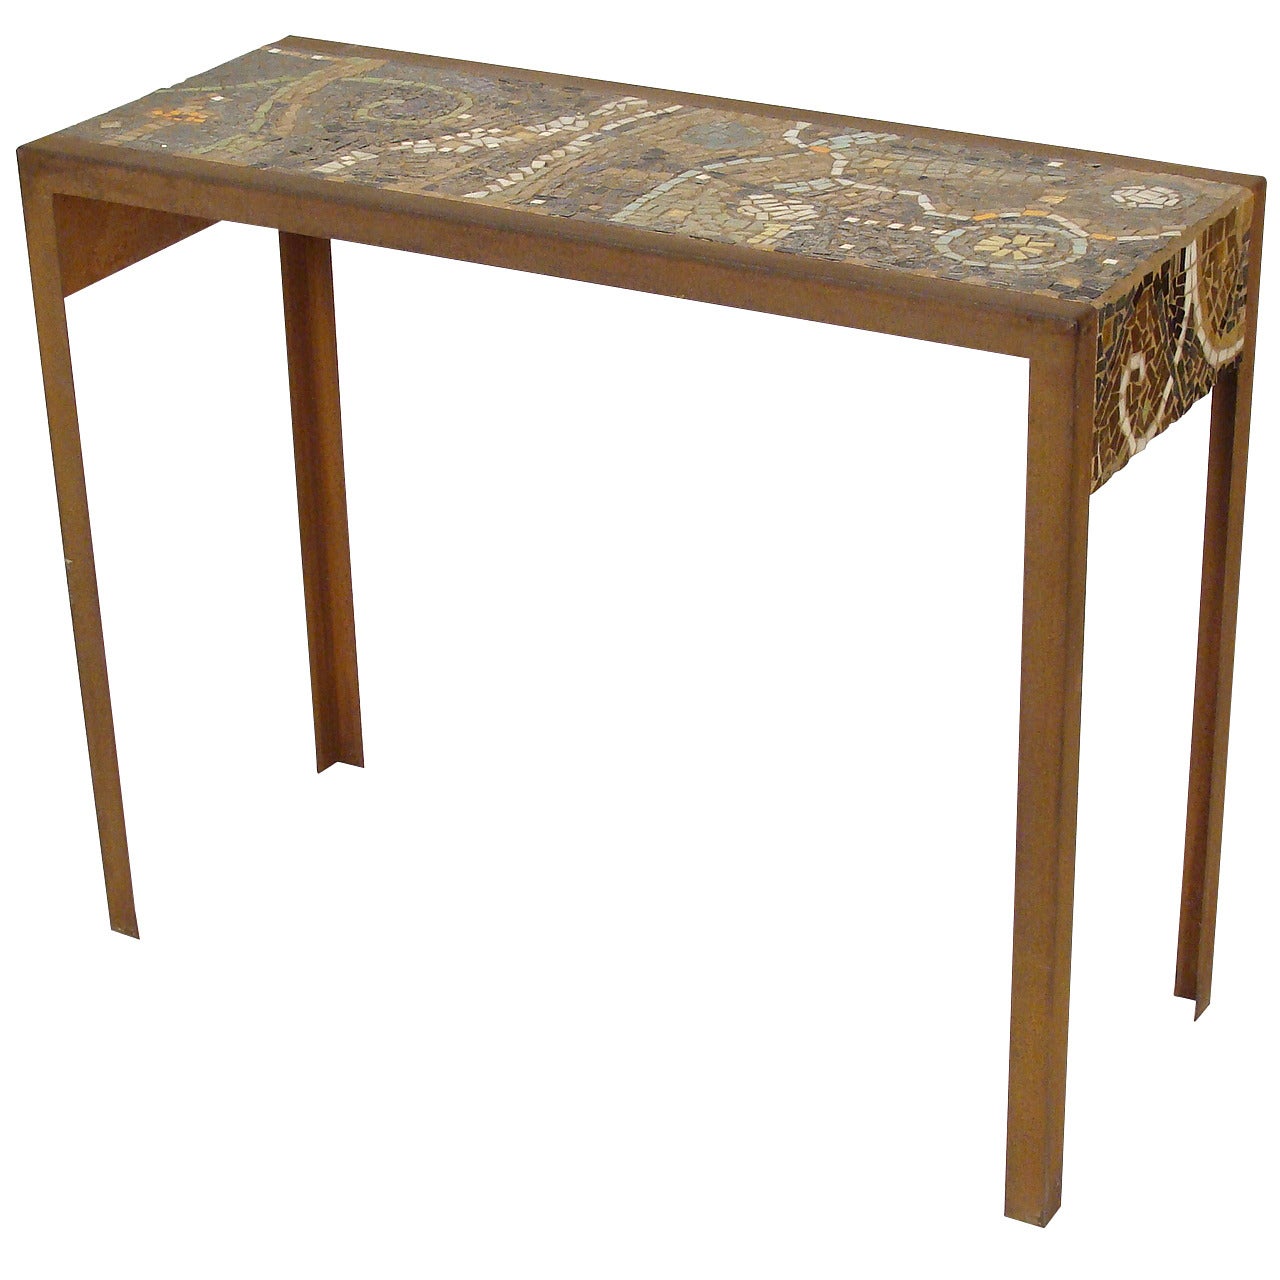 Mosaic Tile Top Console Table